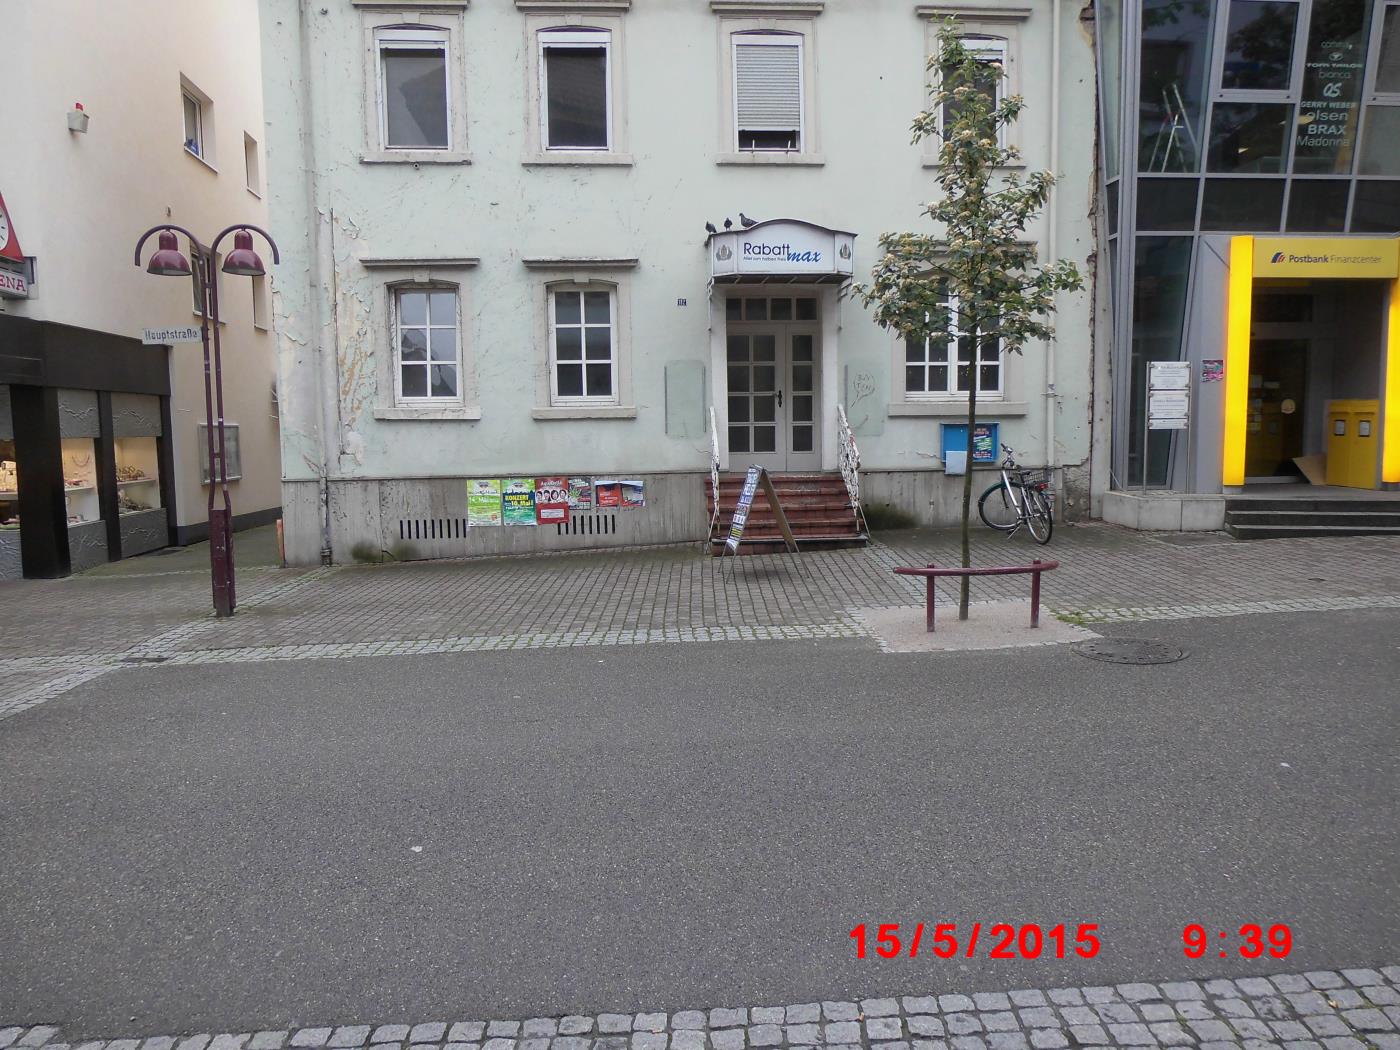 Jehovah's Witnesses fail in Wiesloch